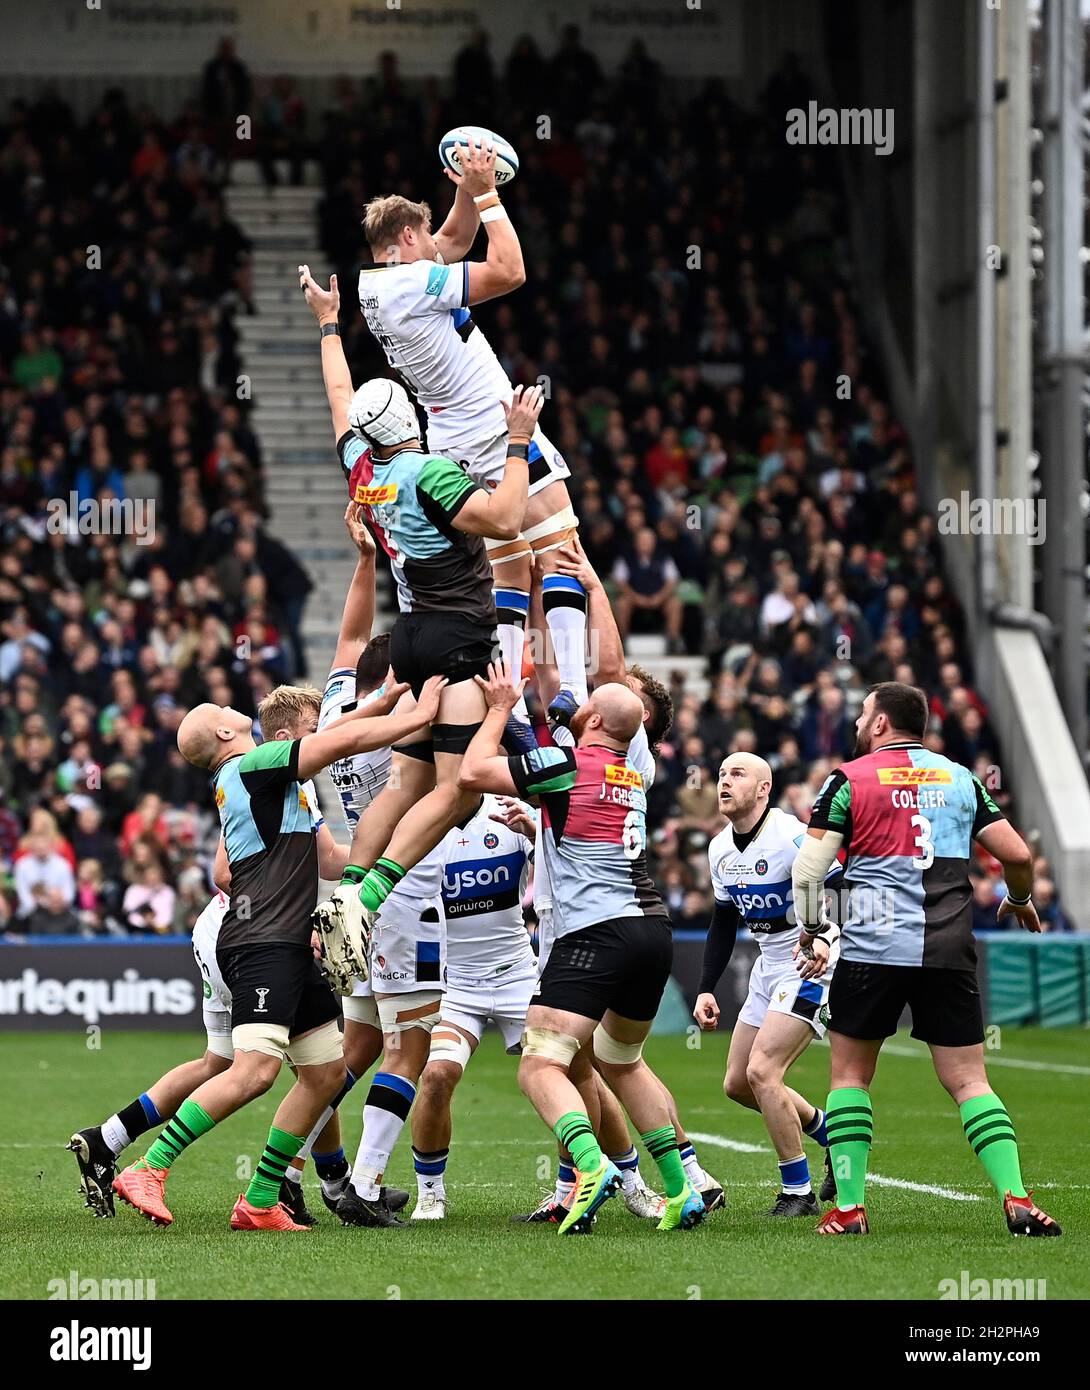 Twickenham, United Kingdom. 23rd Oct, 2021. Premiership Rugby. Harlequins V Bath Rugby. The Stoop. Twickenham. Tom Ellis (Bath) catches at the line out. Credit: Sport In Pictures/Alamy Live News Stock Photo